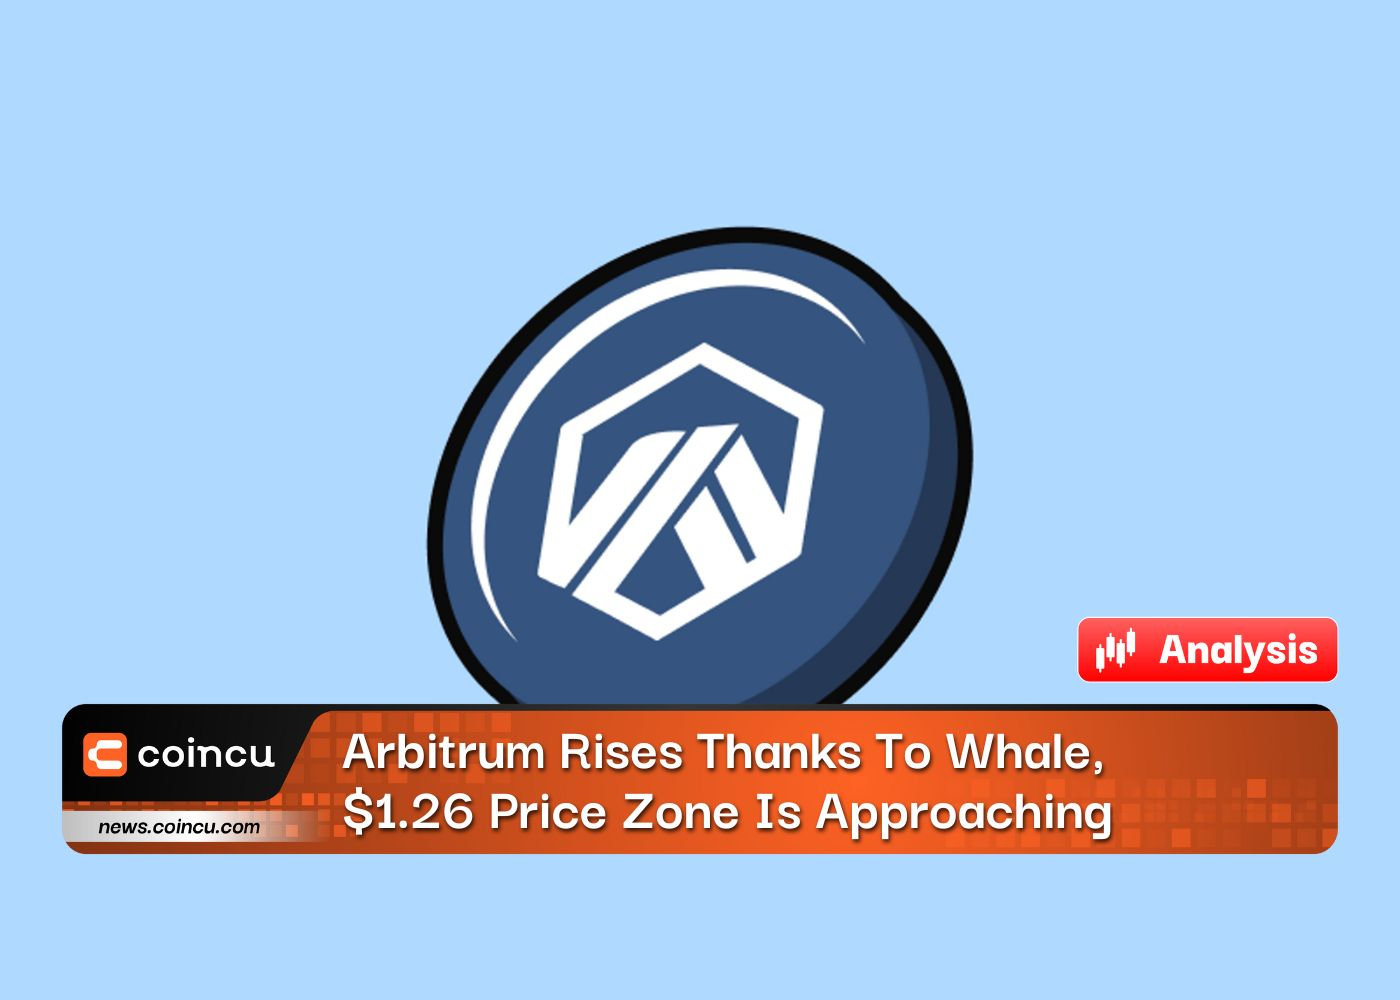 Arbitrum Rises Thanks To Whale, $1.26 Price Zone Is Approaching